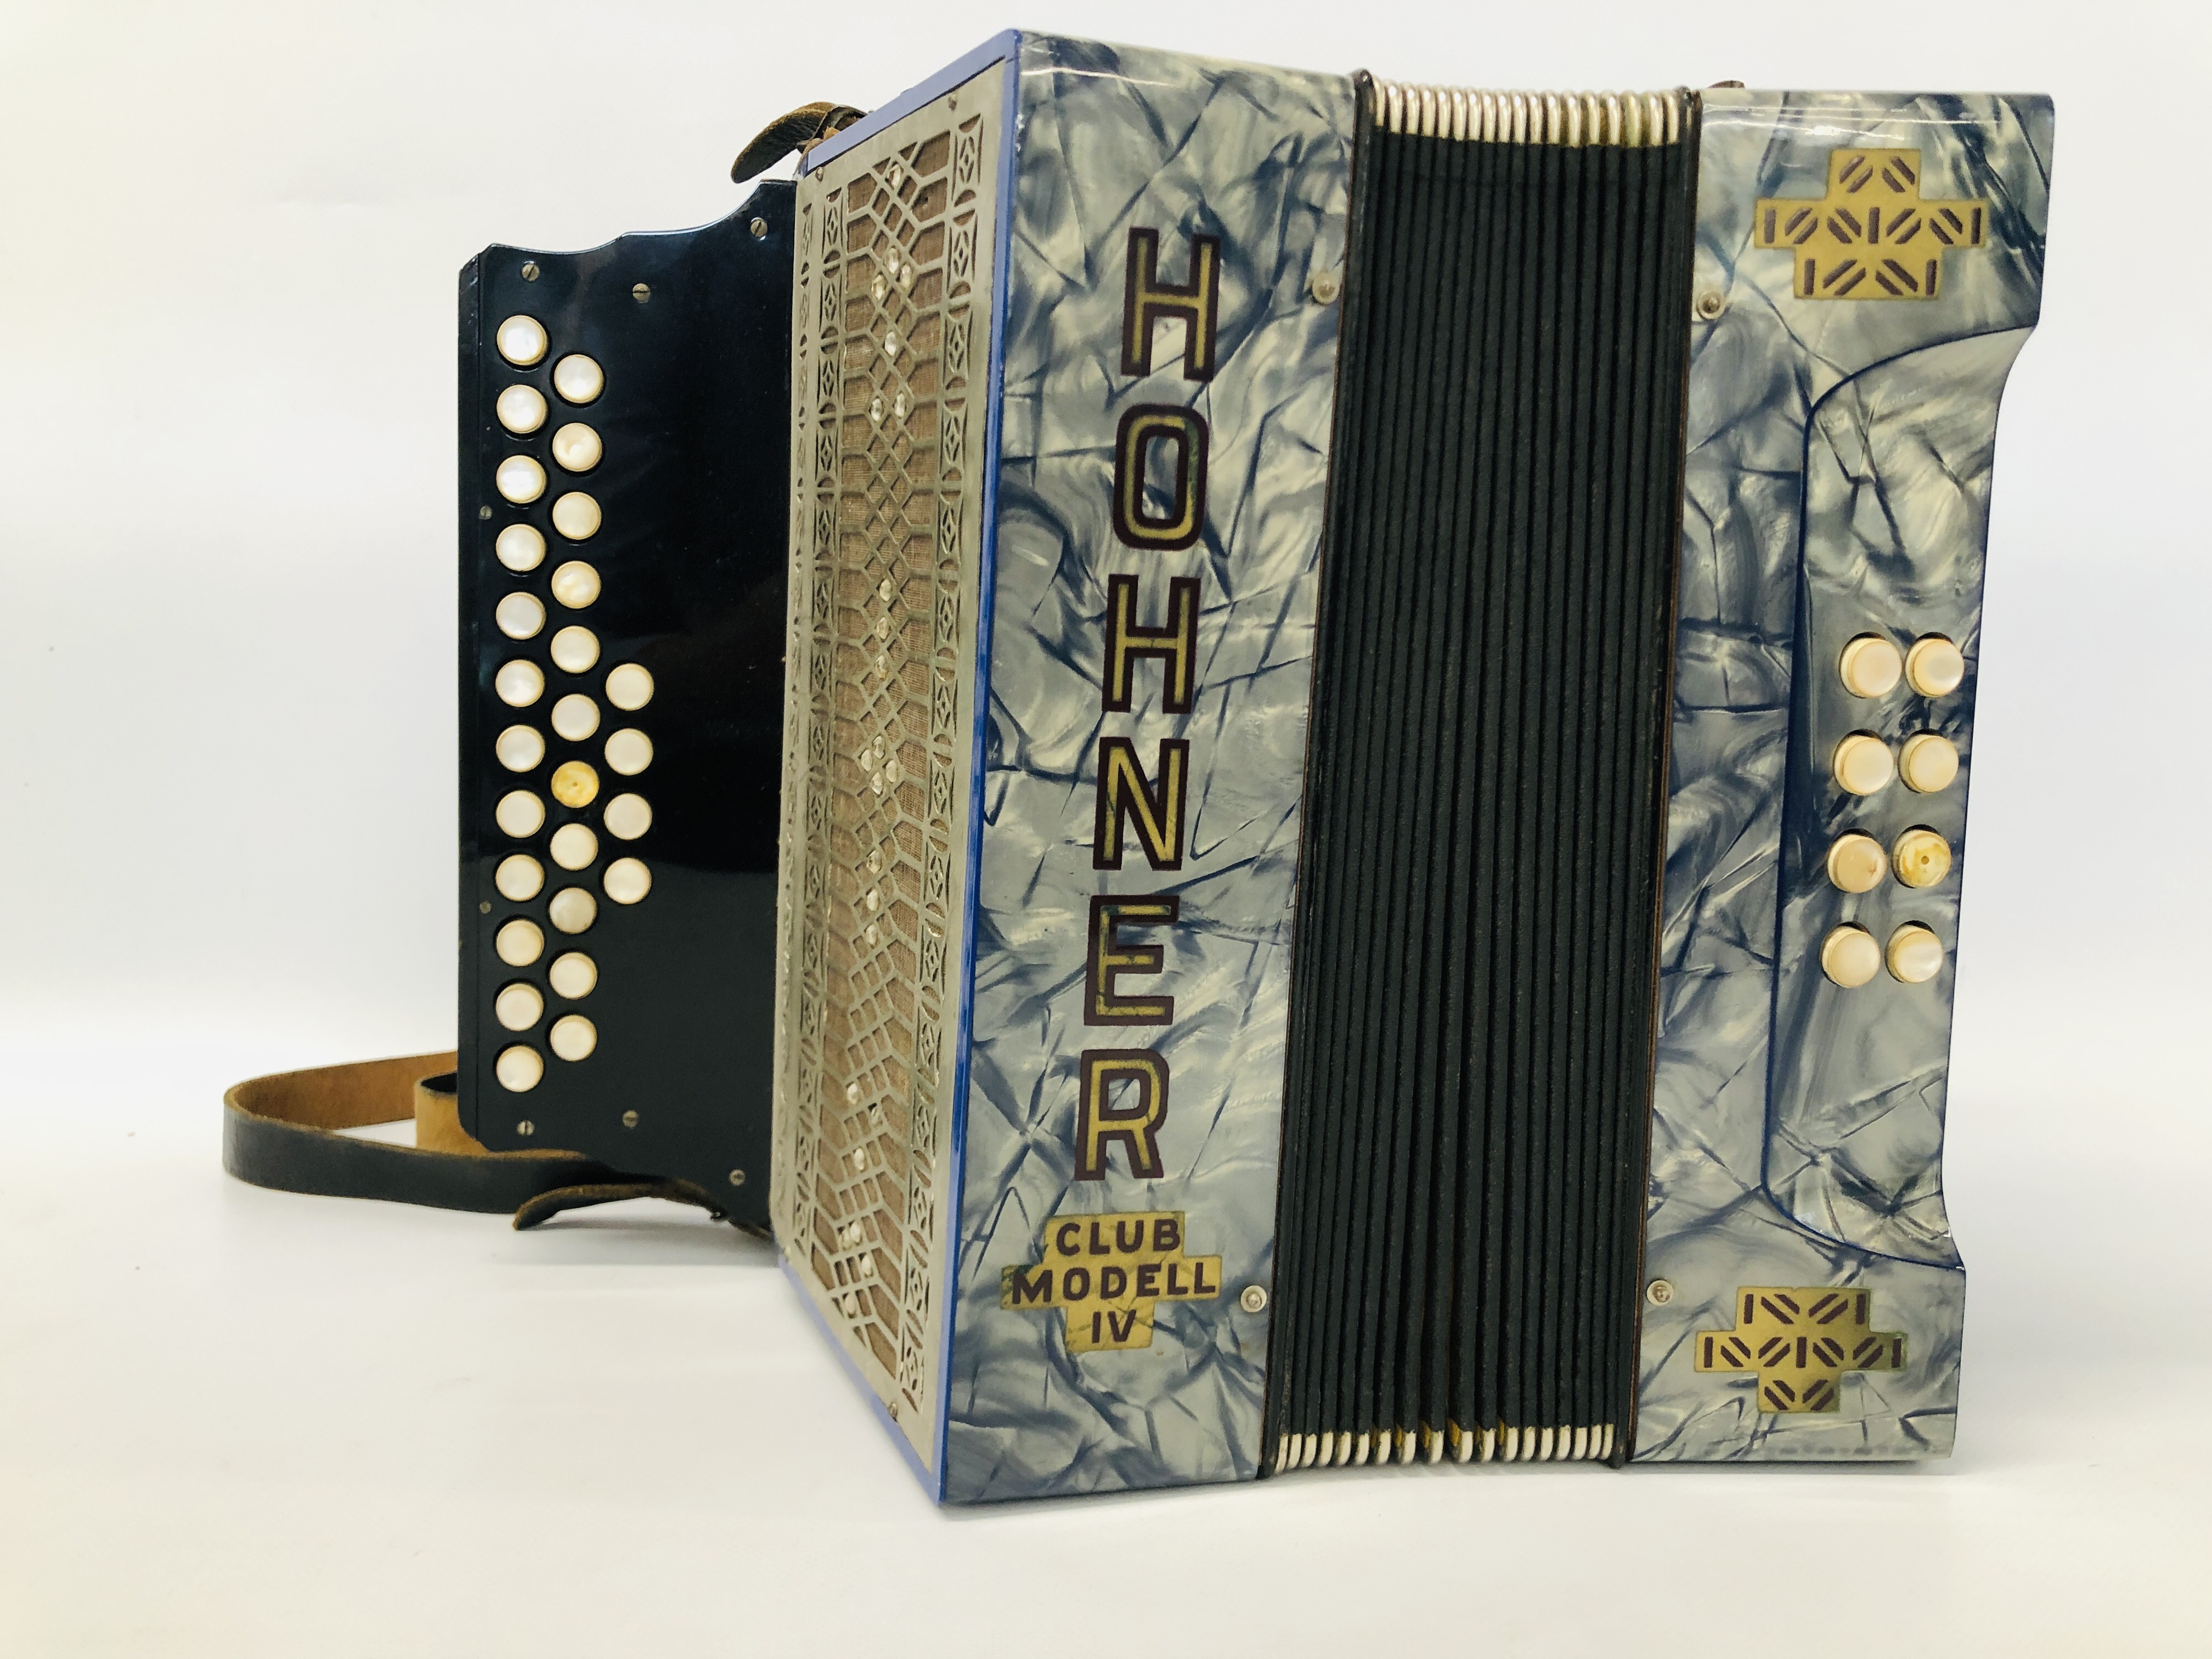 VINTAGE HOHNER CLUB MODELL IV ACCORDION - SOLD AS SEEN